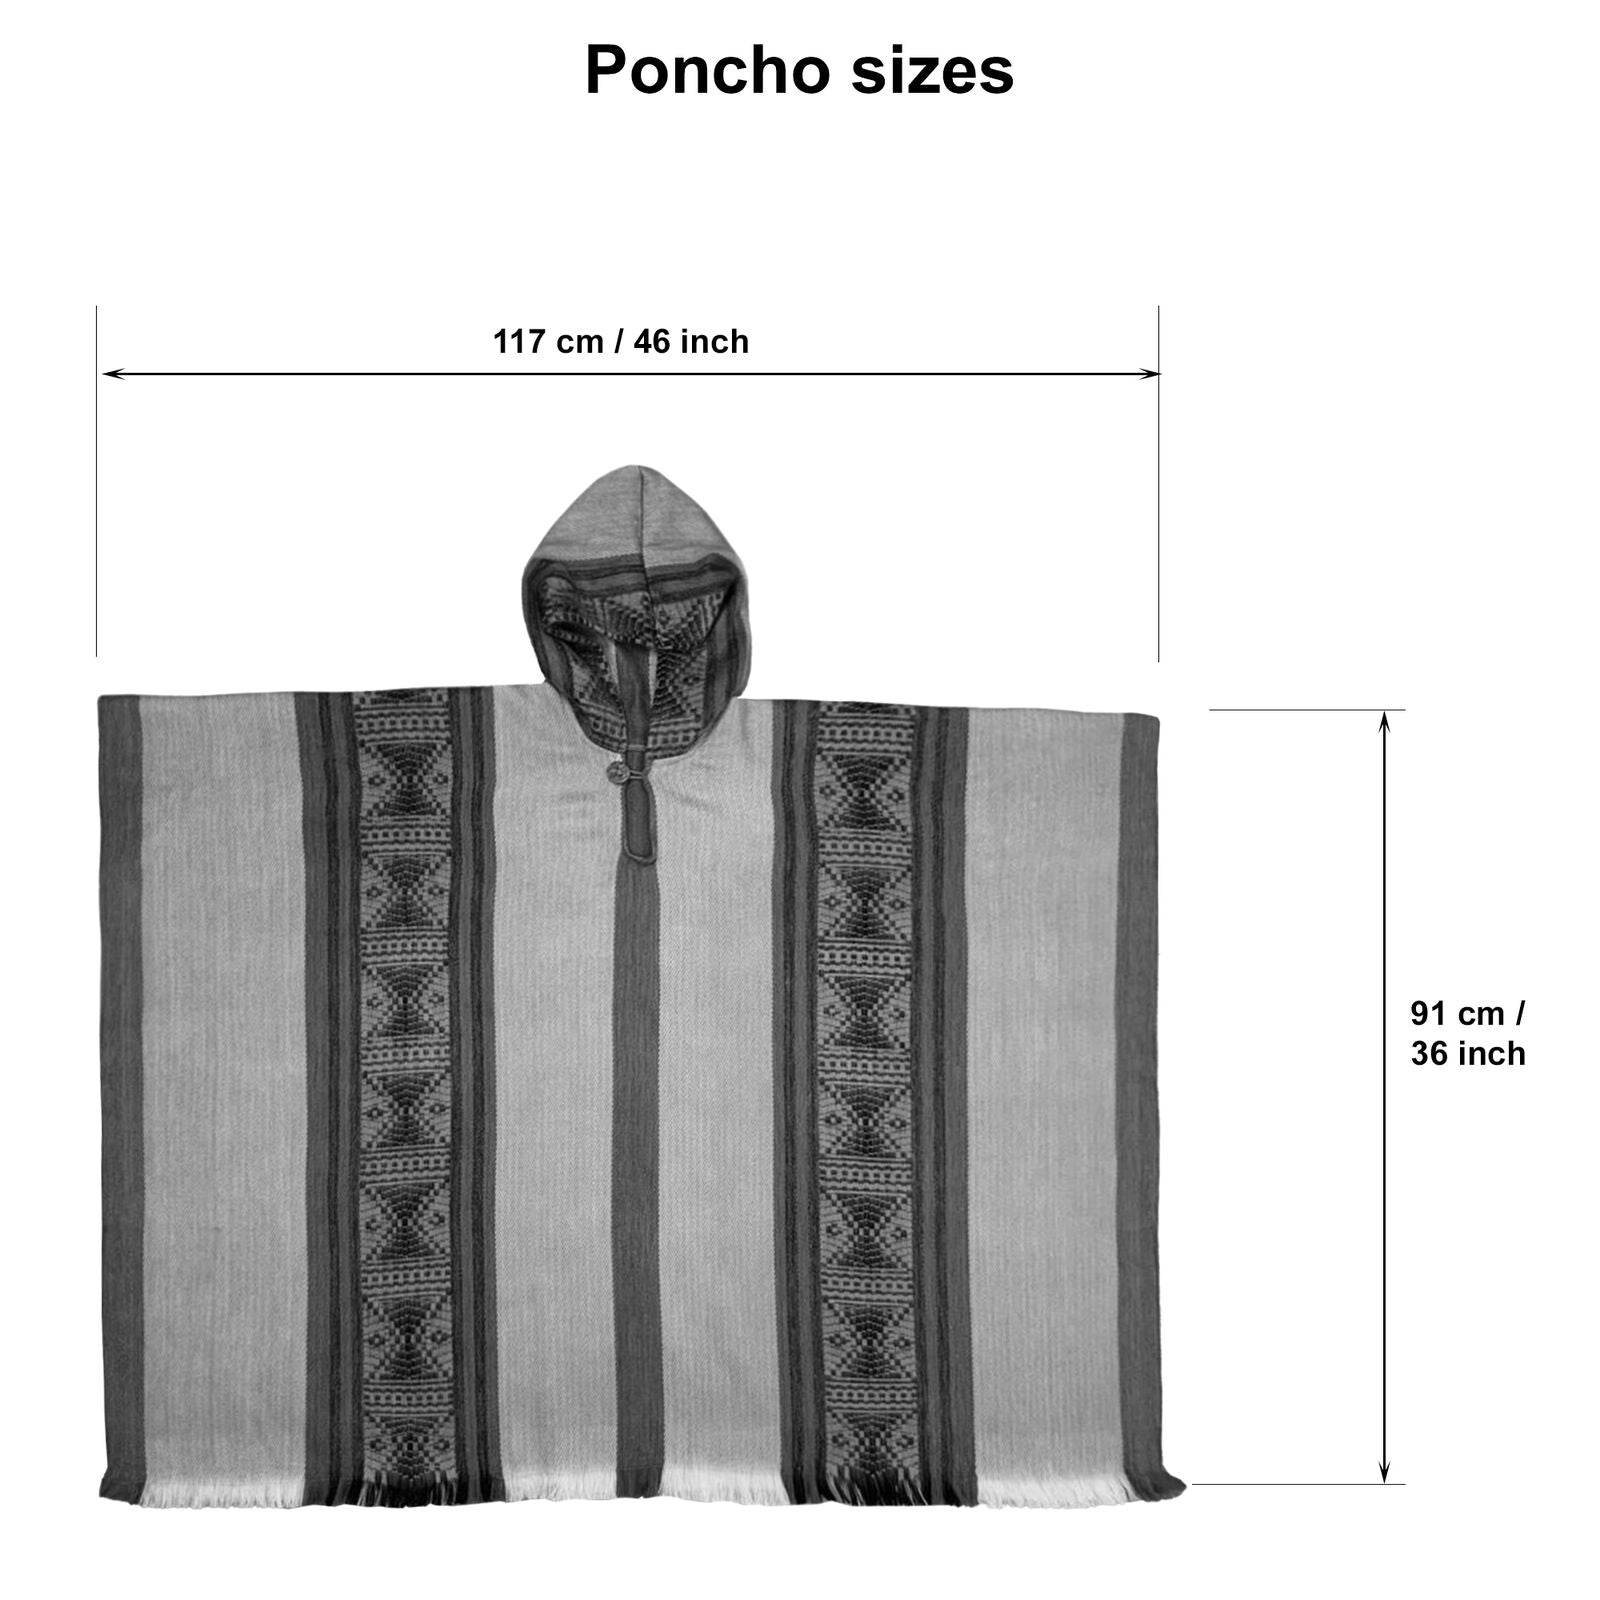 Encanto inspired Bruno Madrigal baby alpaca hooded poncho costume - geometric pattern - Adult size